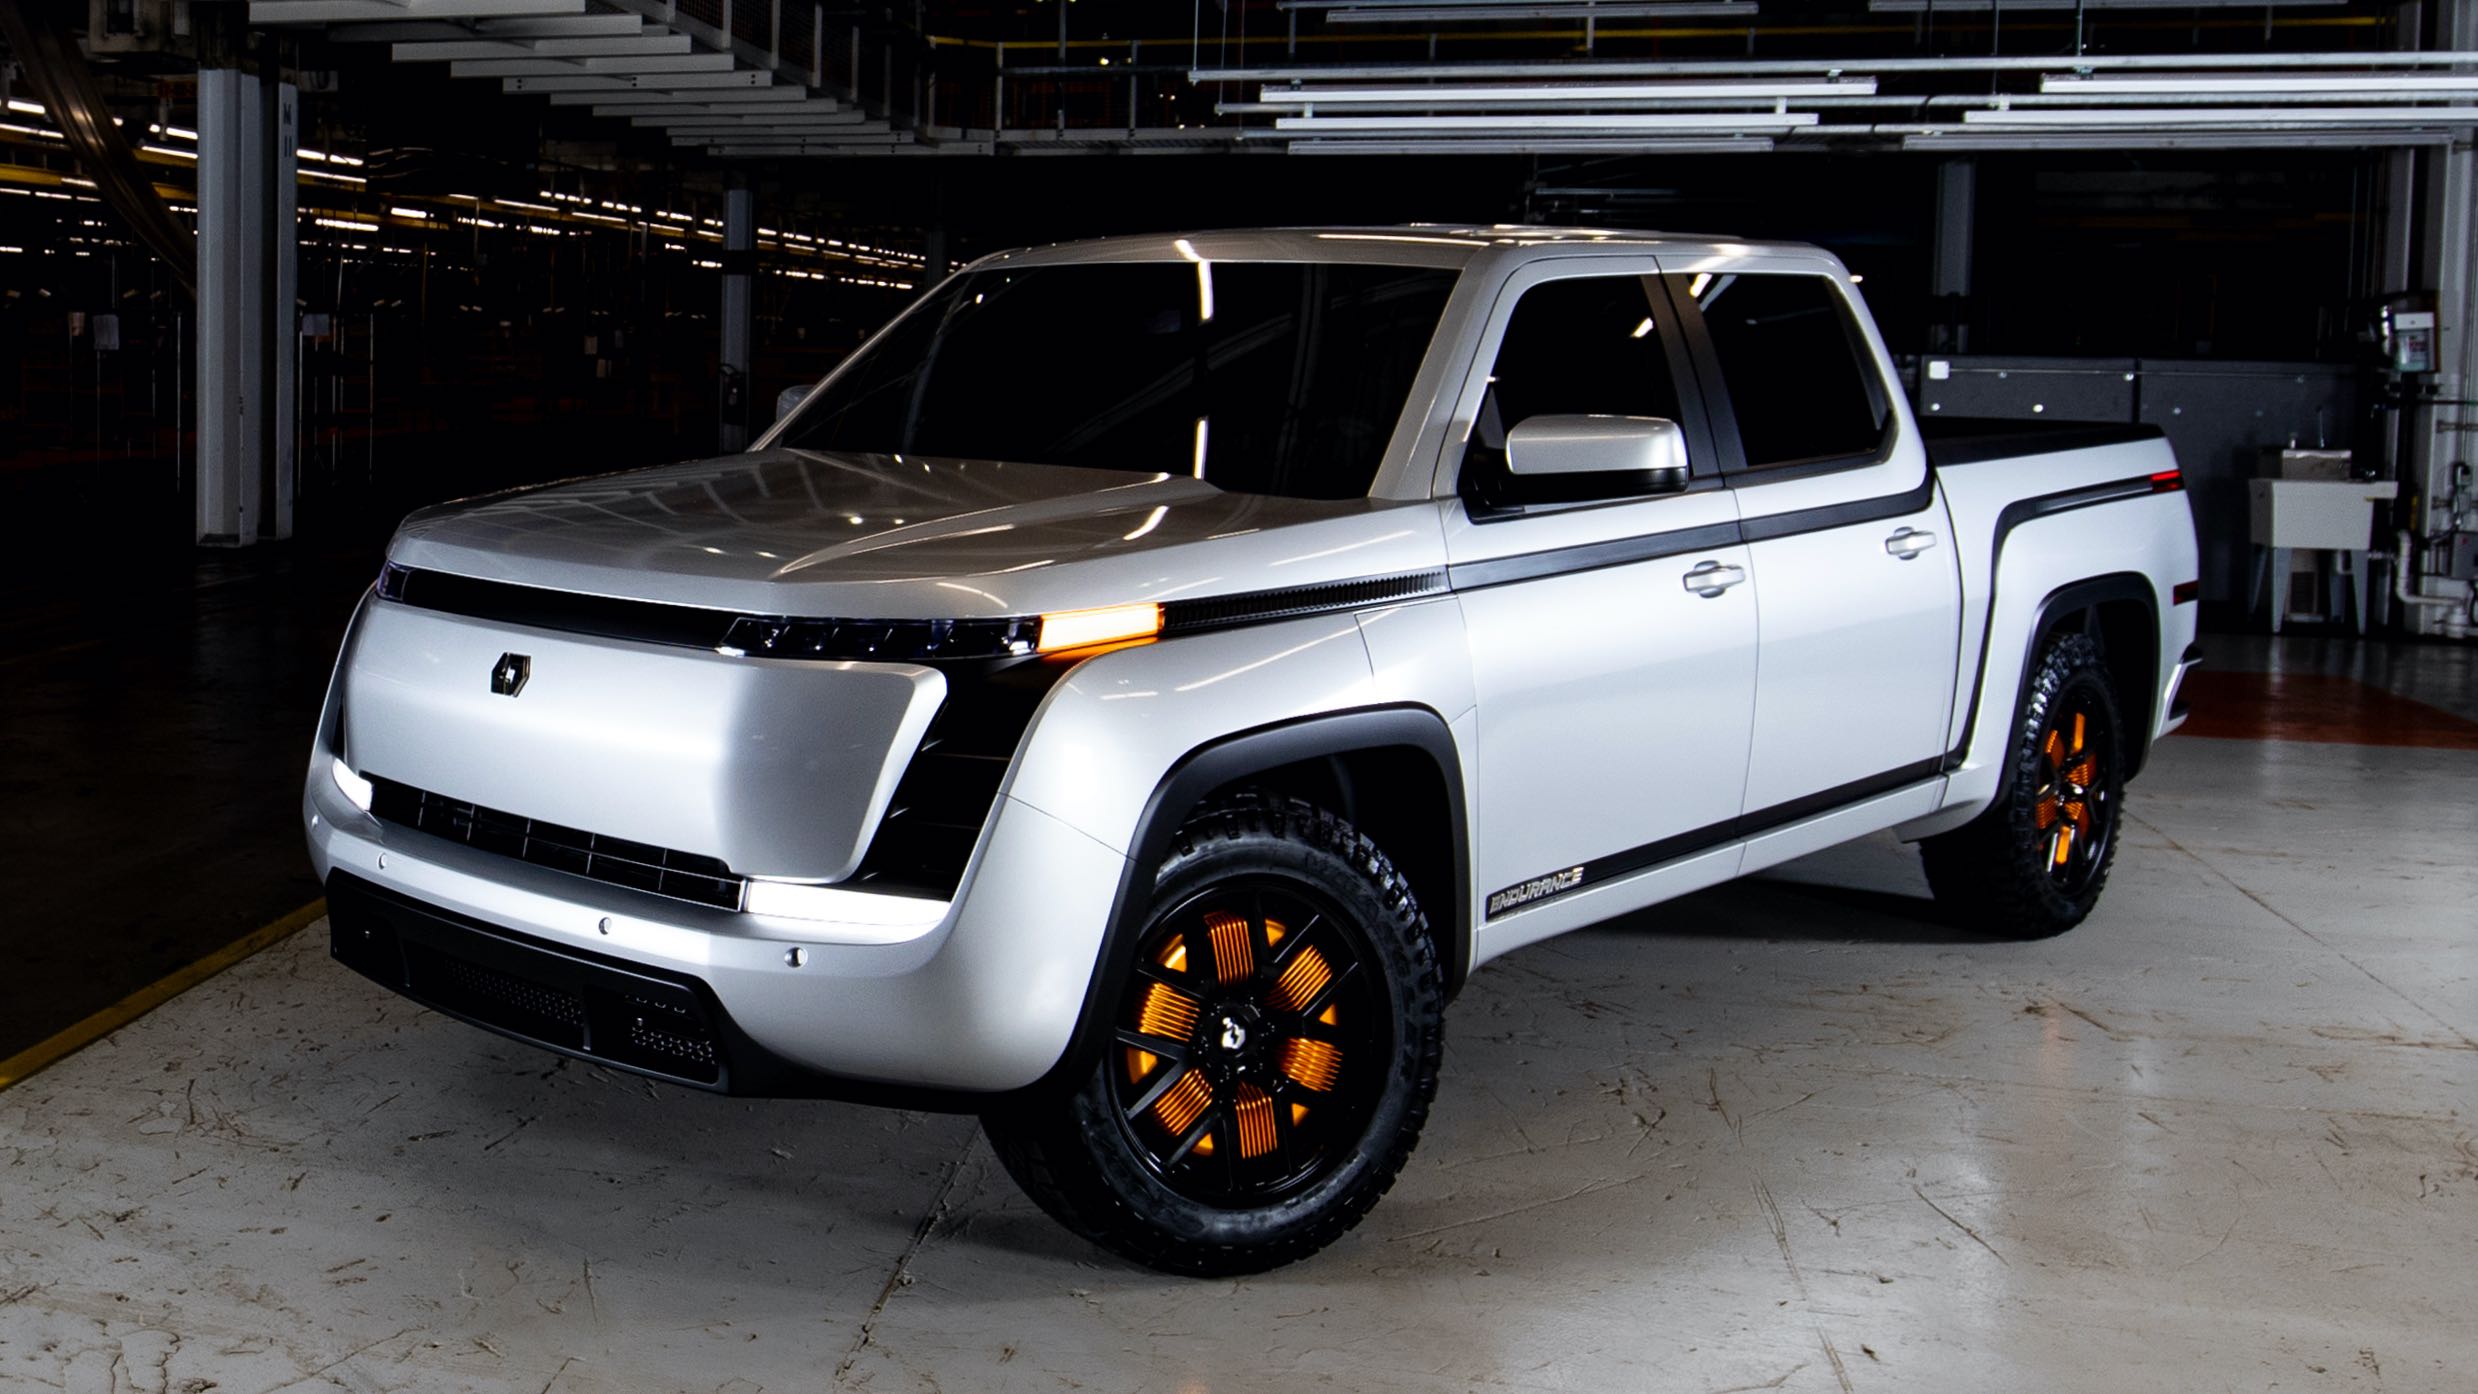 Lordstown Endurance electric pickup truck officially revealed in Ohio